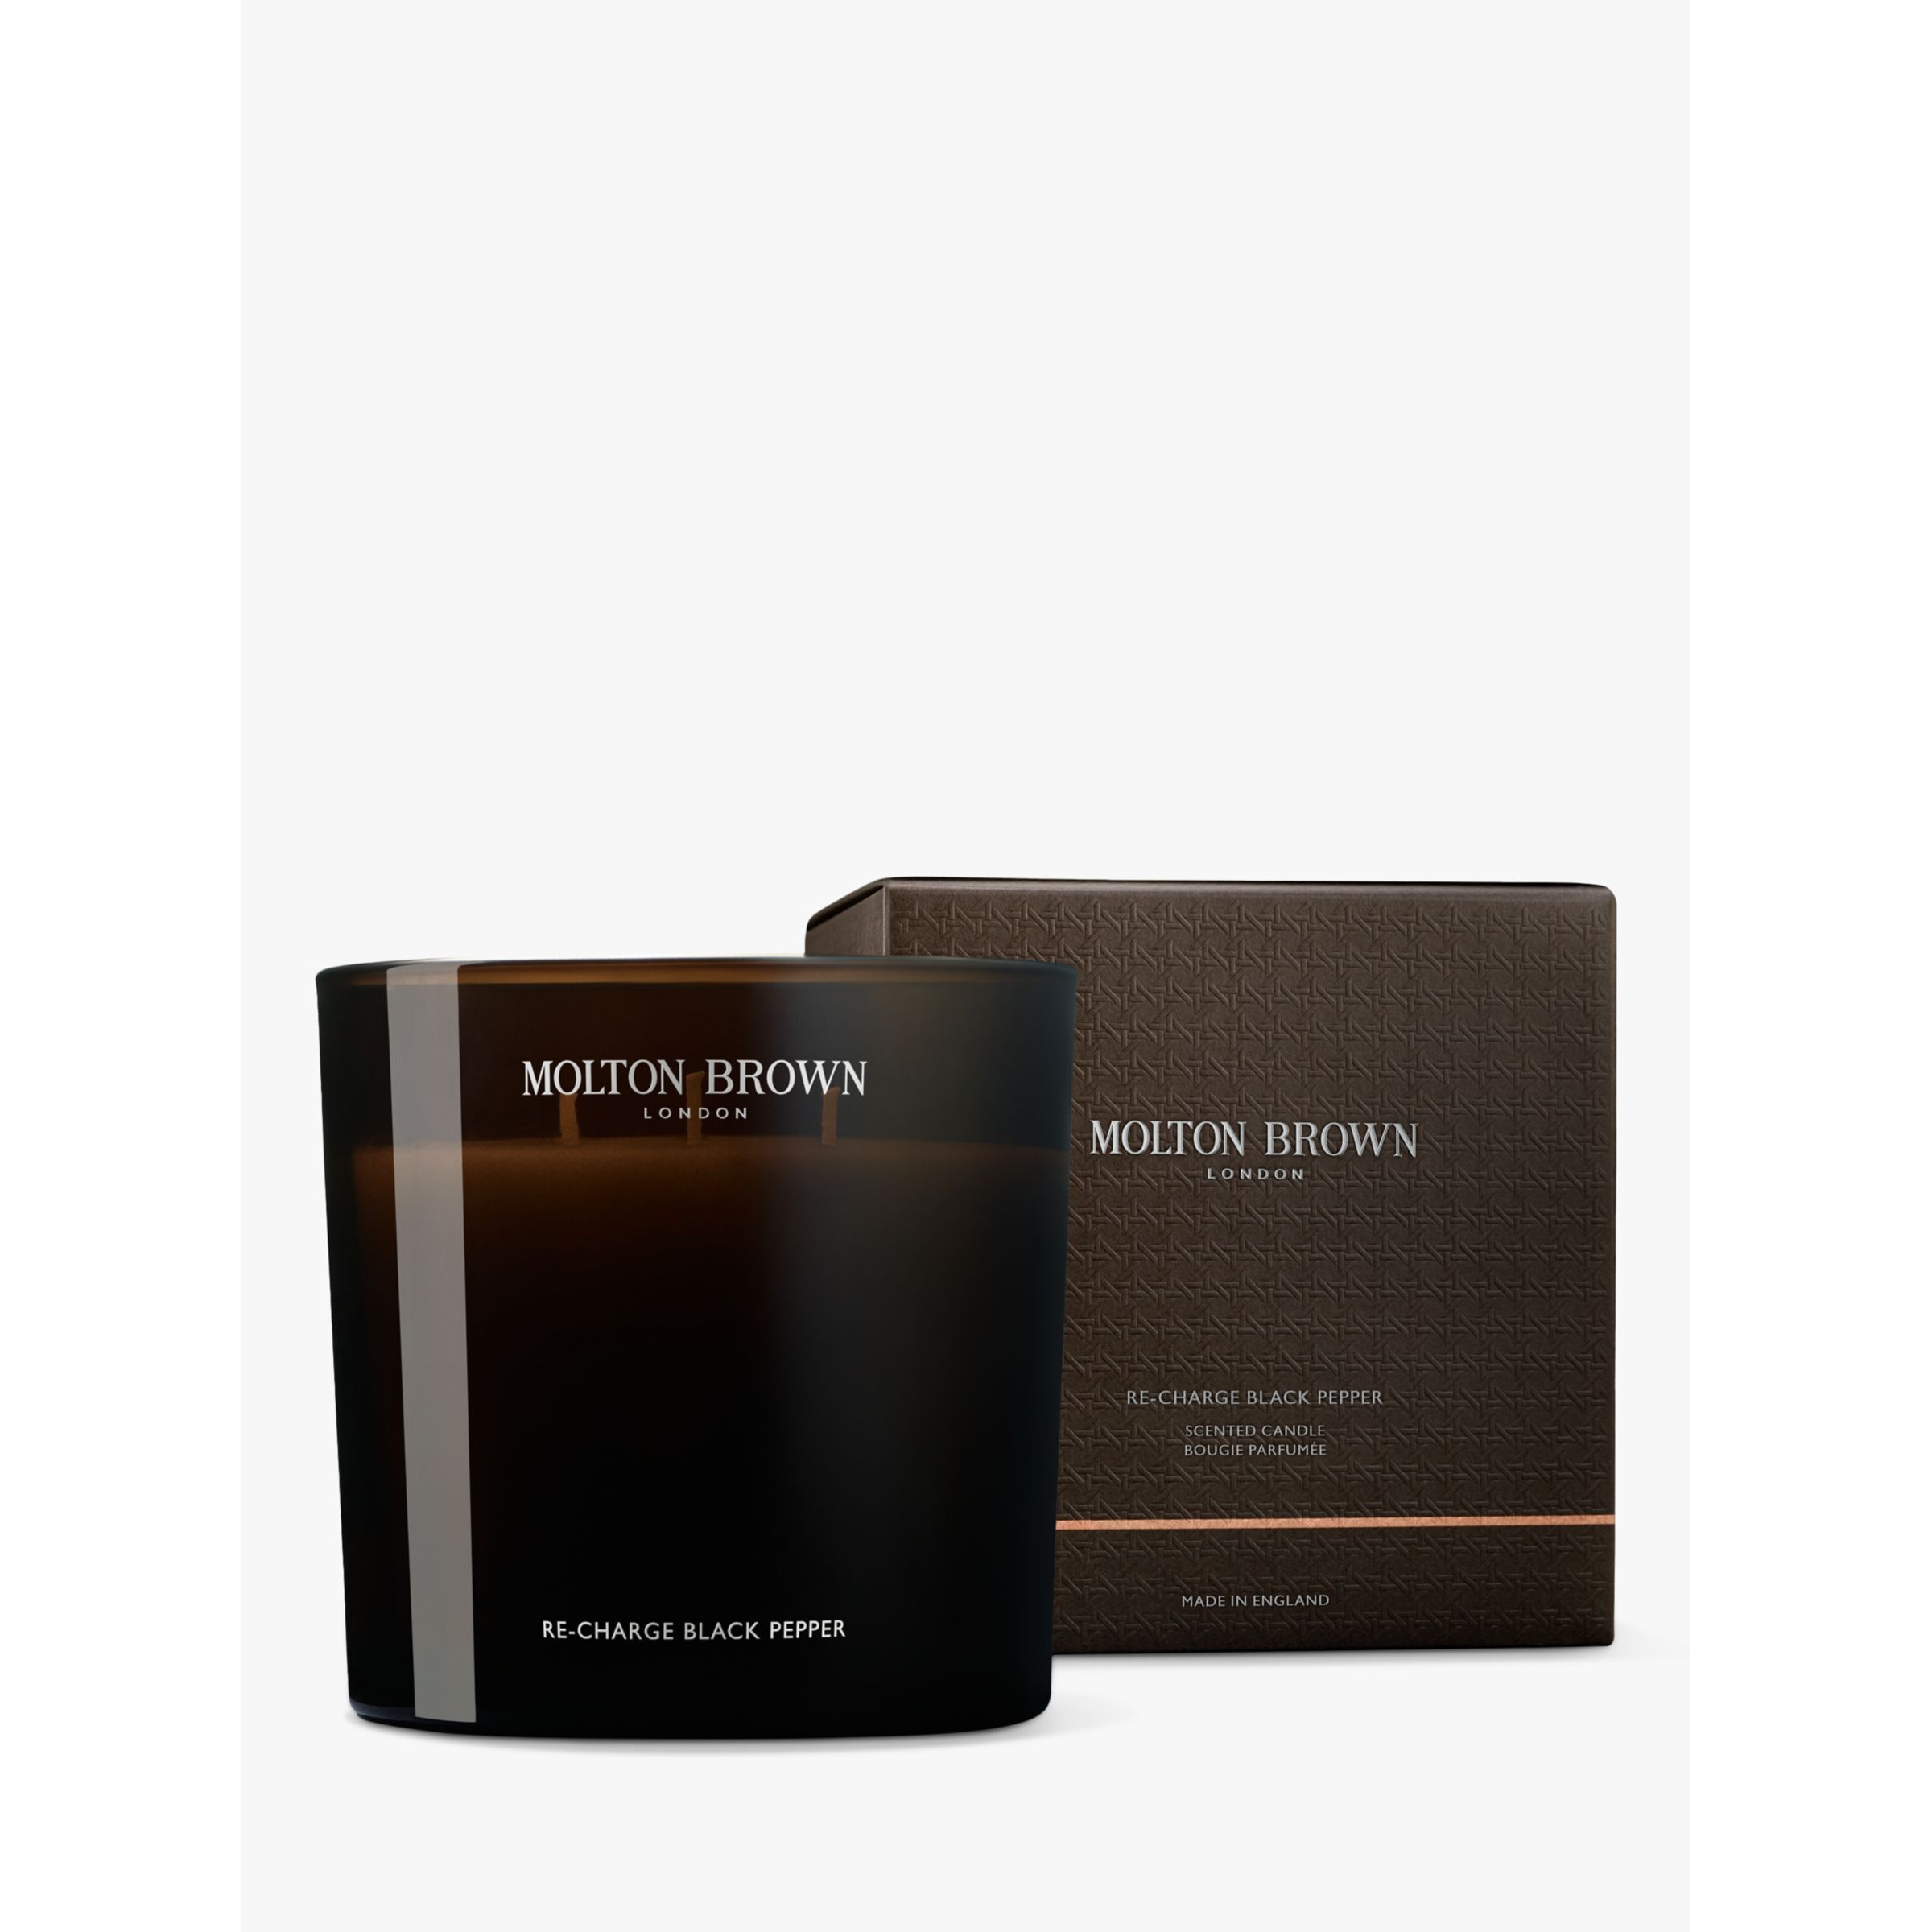 Molton Brown Re-charge Black Pepper Scented Luxury Candle, 600g - image 1